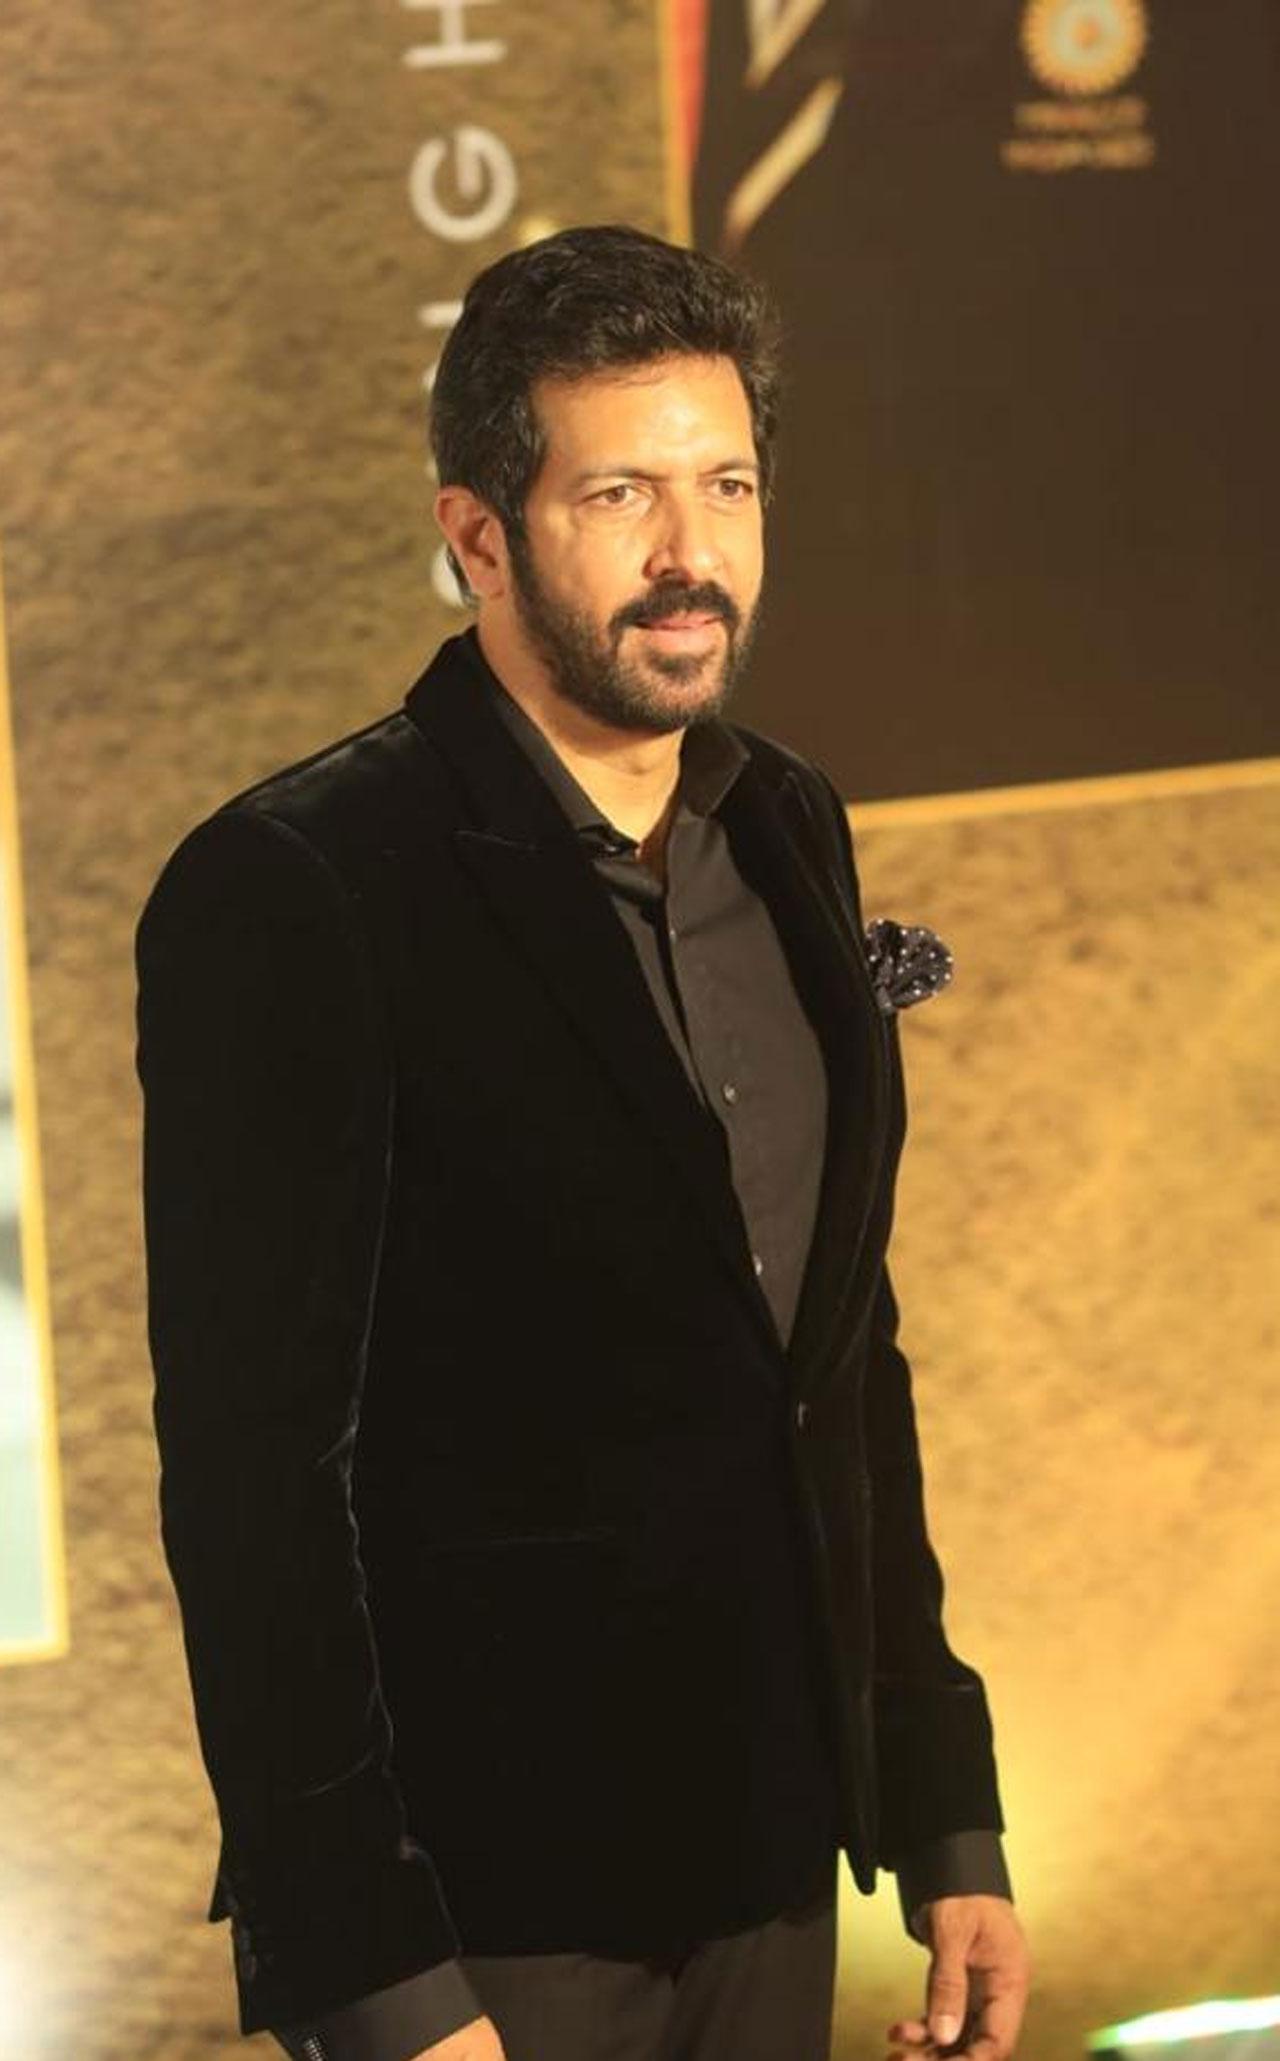 Kabir Khan kept it a little casual yet stylish at the screening of 83. This is his first directorial after the 2017 Salman Khan-starrer Tubelight. He also directed the web show The Forgotten Army in 2020 that starred Sunny Kaushal.